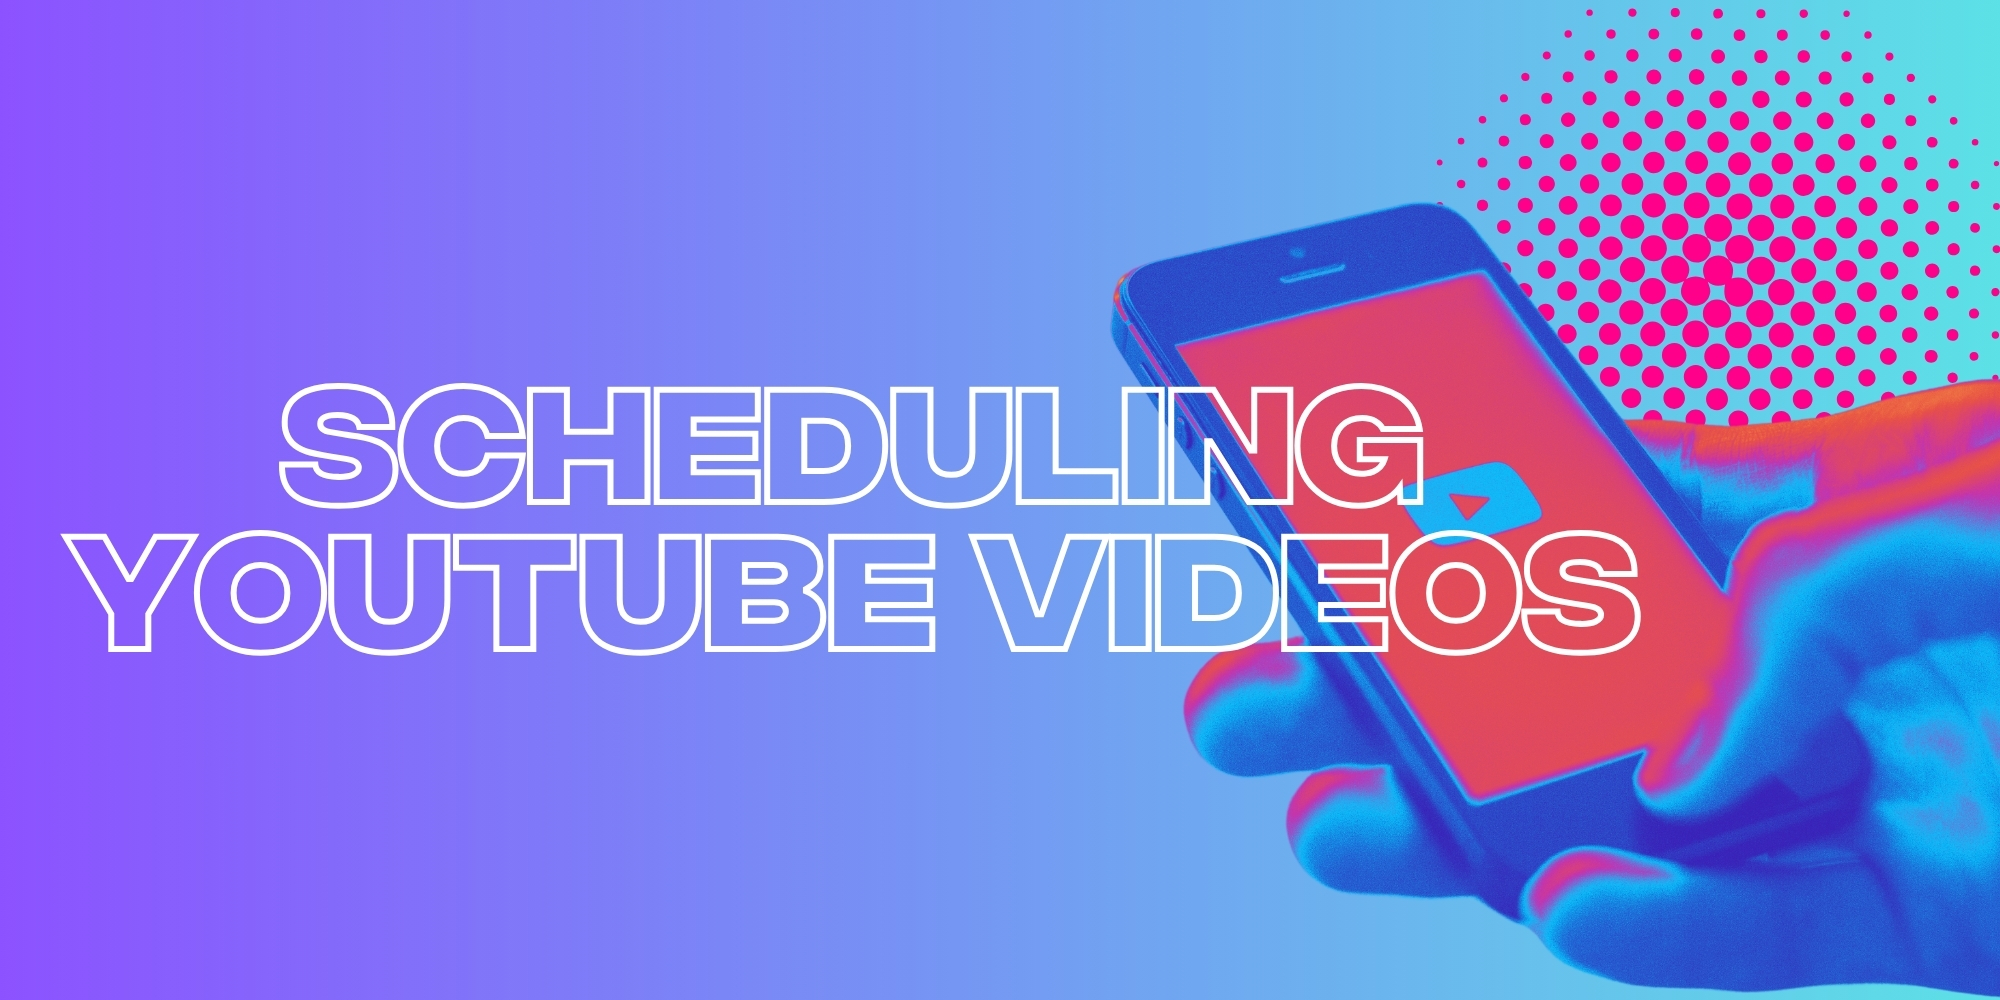 How to Schedule YouTube Videos